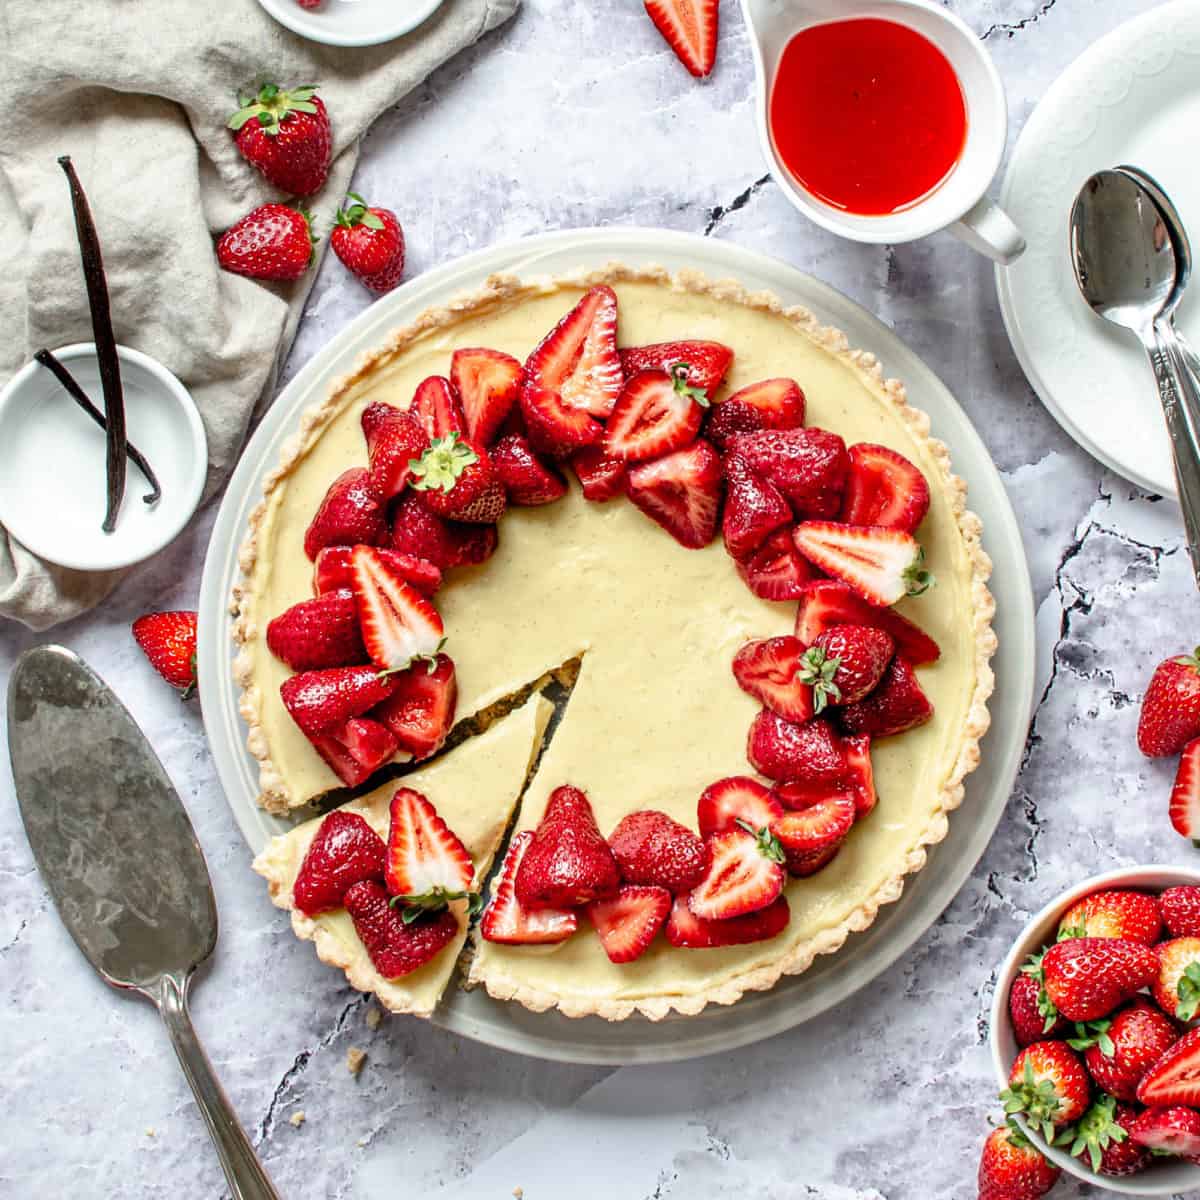 A finished strawberry custard tart on a plate with a serving knife.